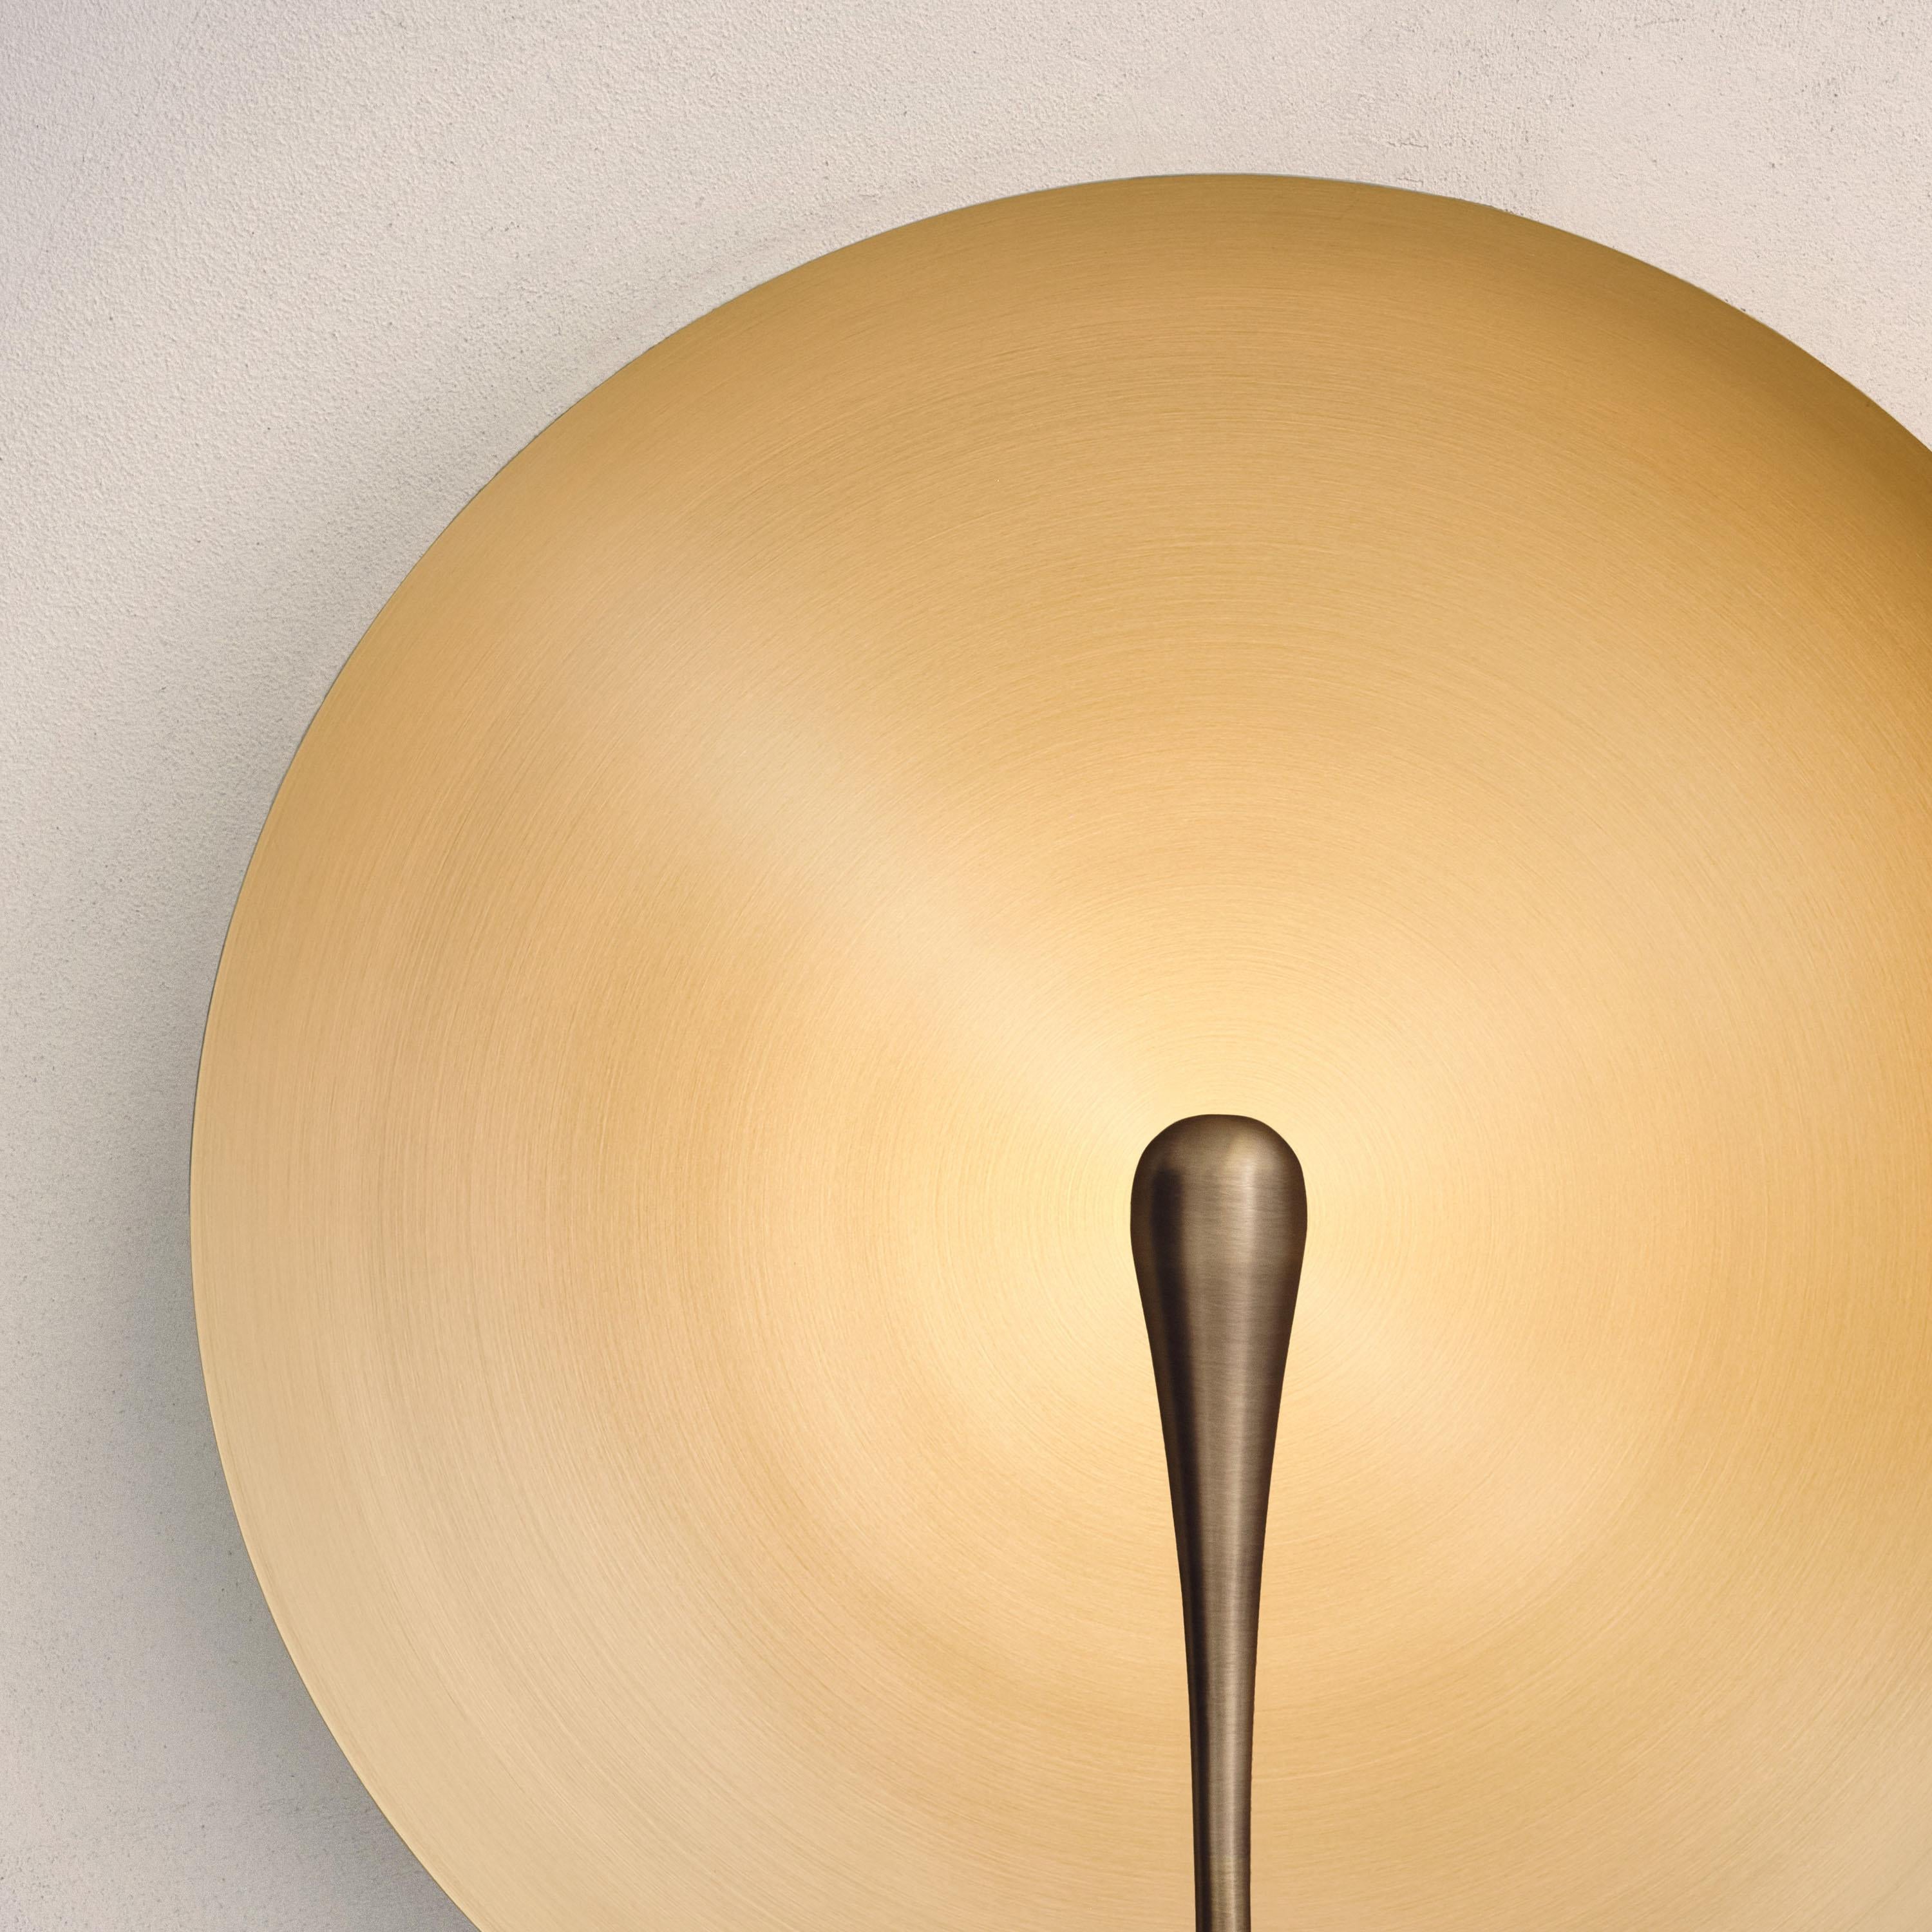 'Cosmic Sol' Handmade Brushed Brass Contemporary Wall Light, Sconce For Sale 1